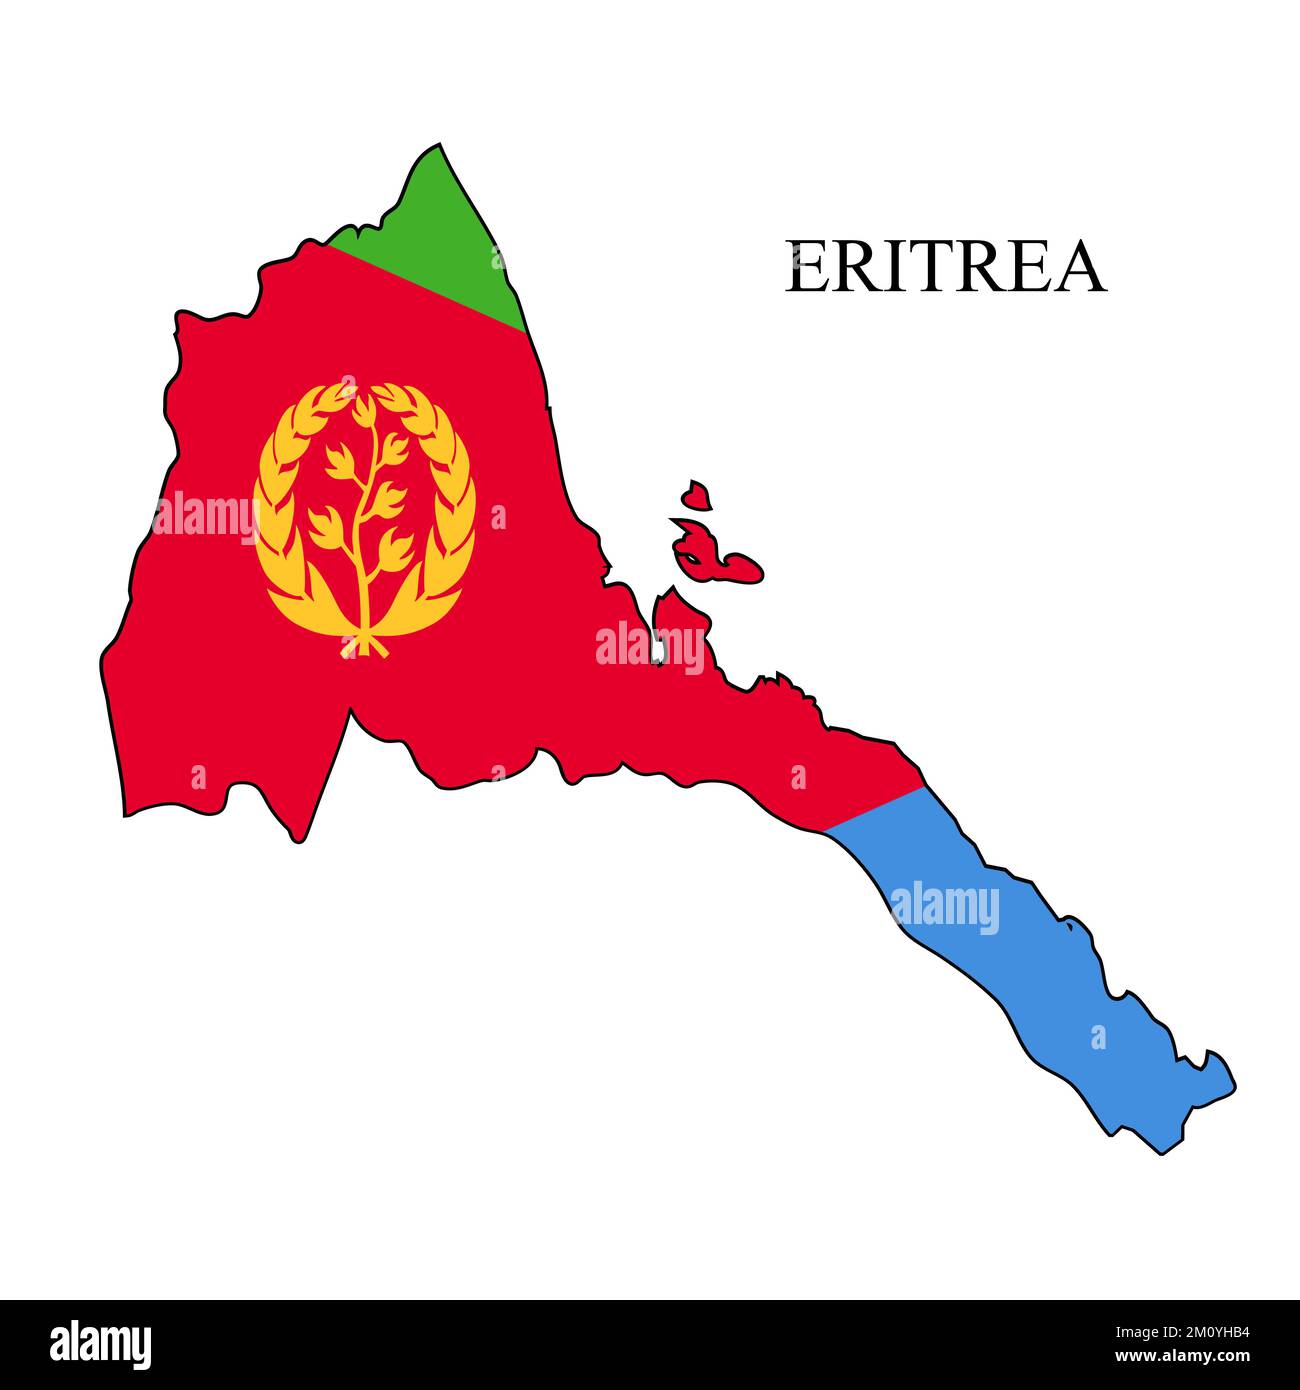 Eritrea map vector illustration. Global economy. Famous country. Eastern Africa. Africa. Stock Vector